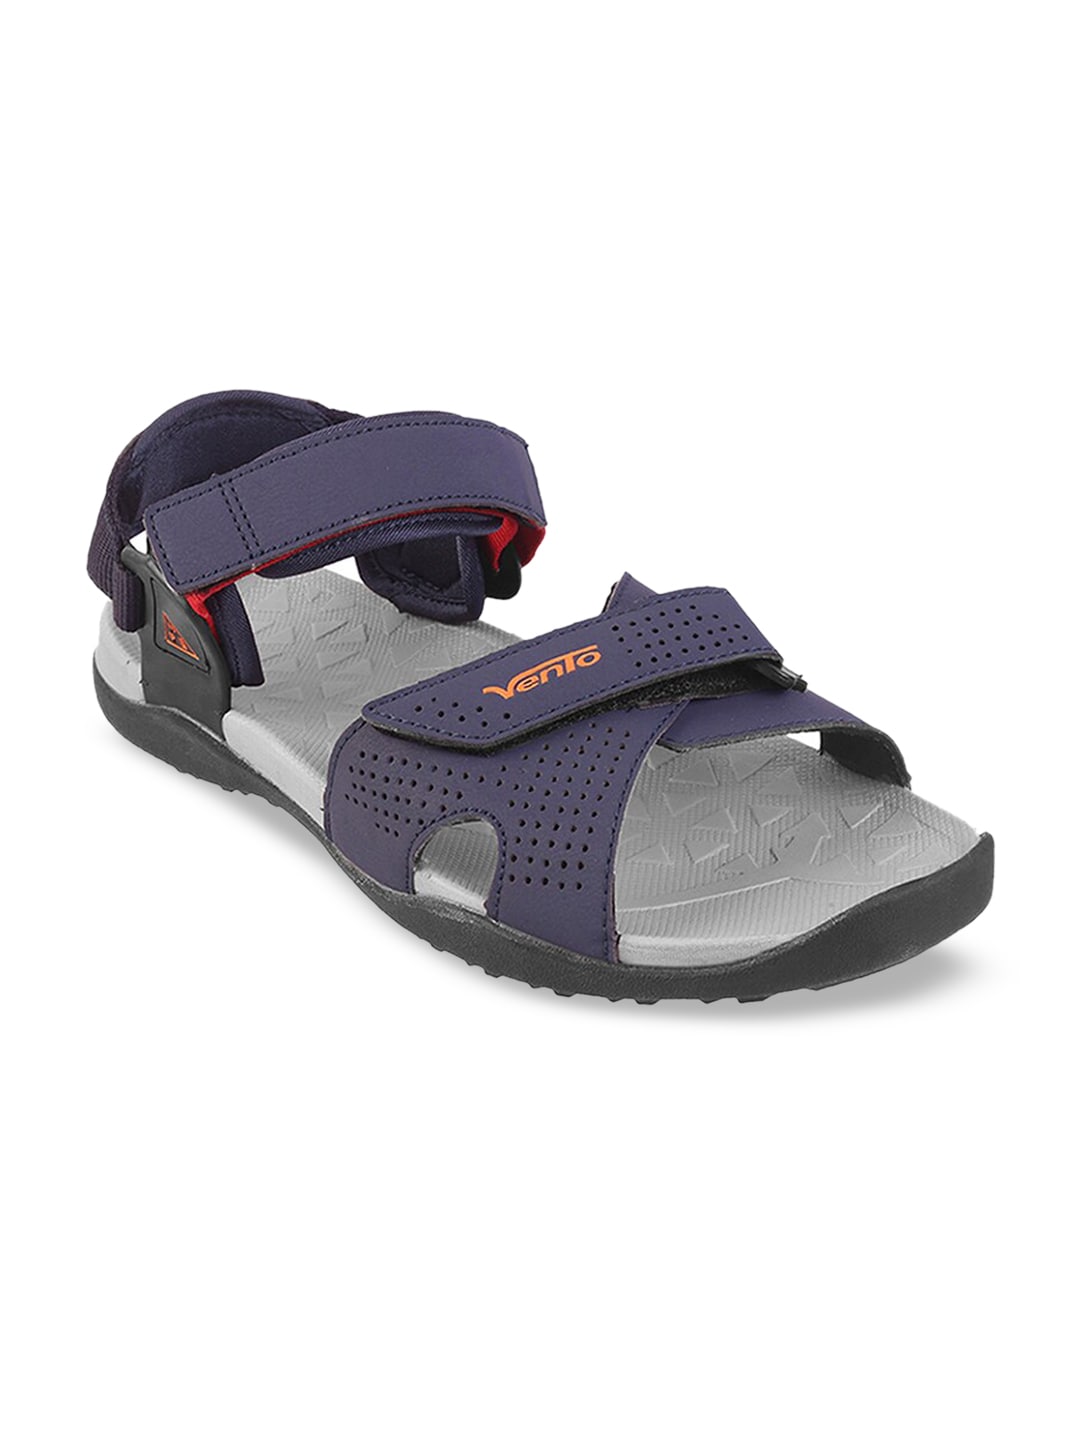 Vento Navy Blue Solid Sports Sandals Price in India